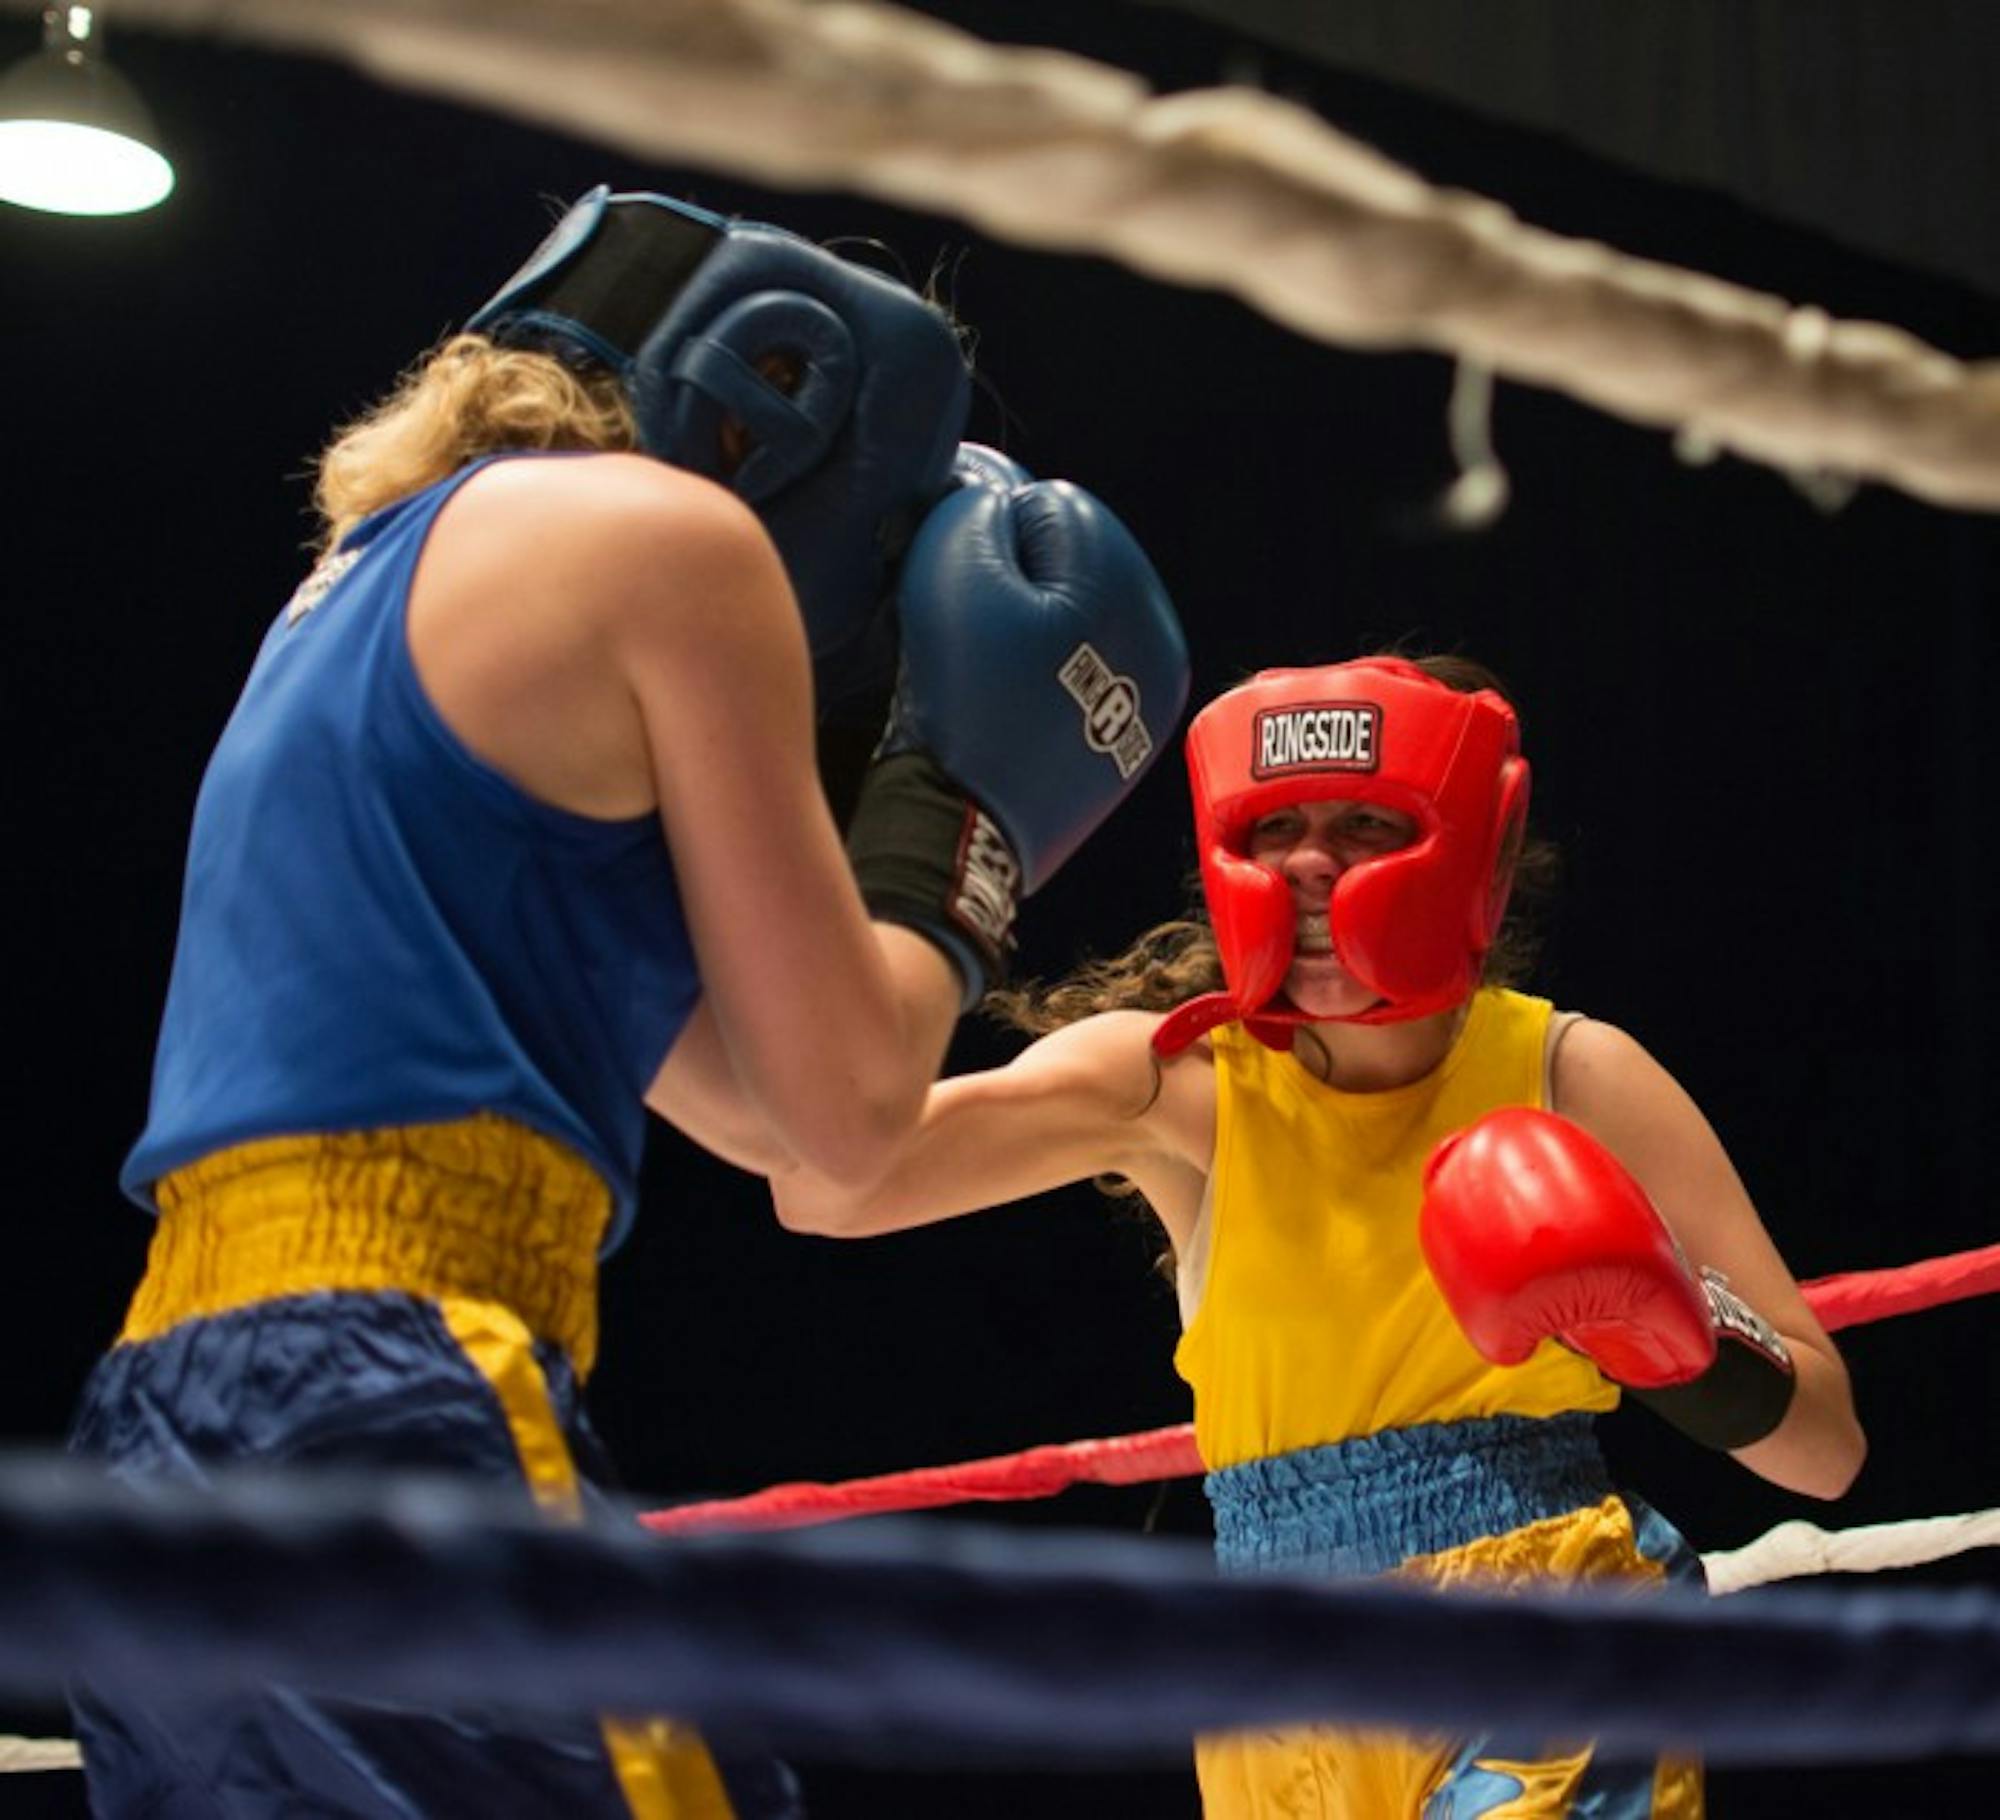 Senior Val “Valiswag” Williams unleashes a hook during her unanimous decision victory over sophomore Mercedes “Merciless” De la Rosa in the semifinal round Tuesday night in Joyce Center Fieldhouse.